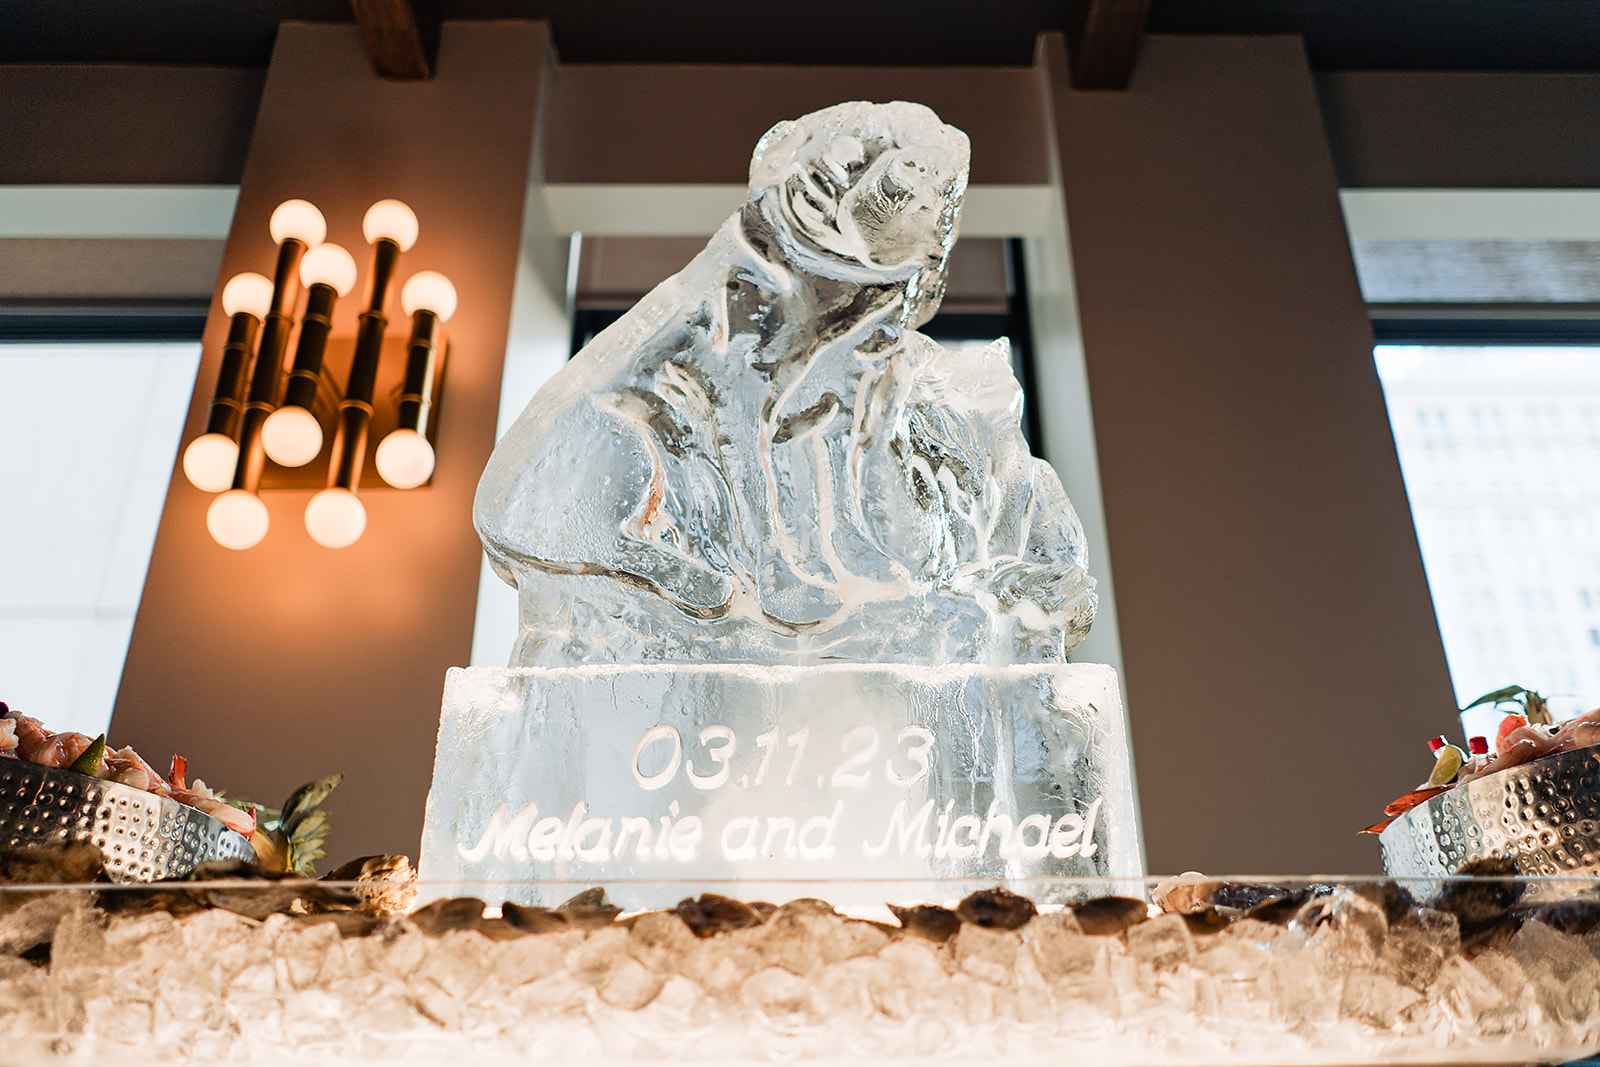 Ice sculpture of dogs at a Cescaphe cocktail hour.